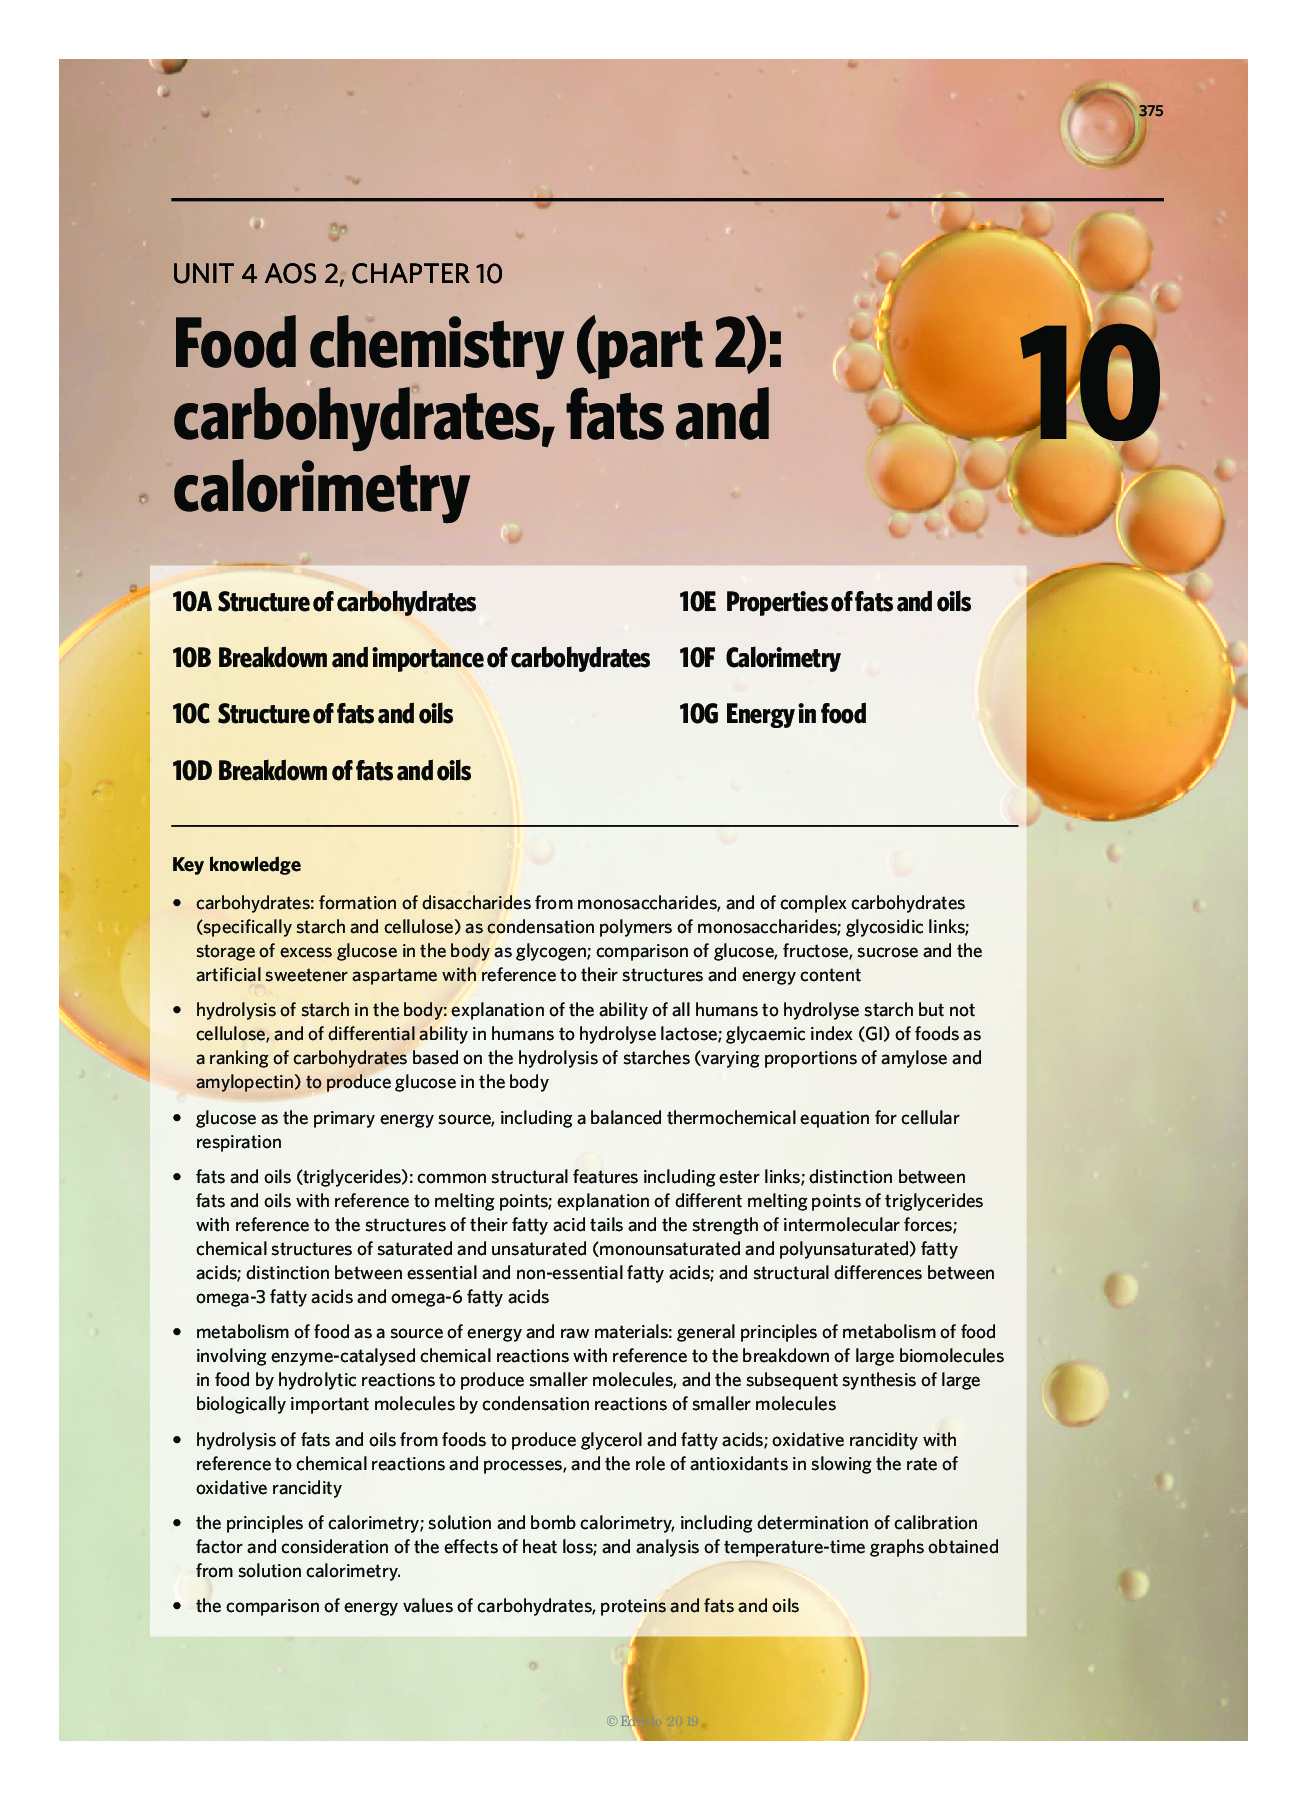 Chapter_10___Food_chemistry_part_2___Carbohydrates_Fats_and_Calorimetry___Edrolo___Textbook_PDF_v1__